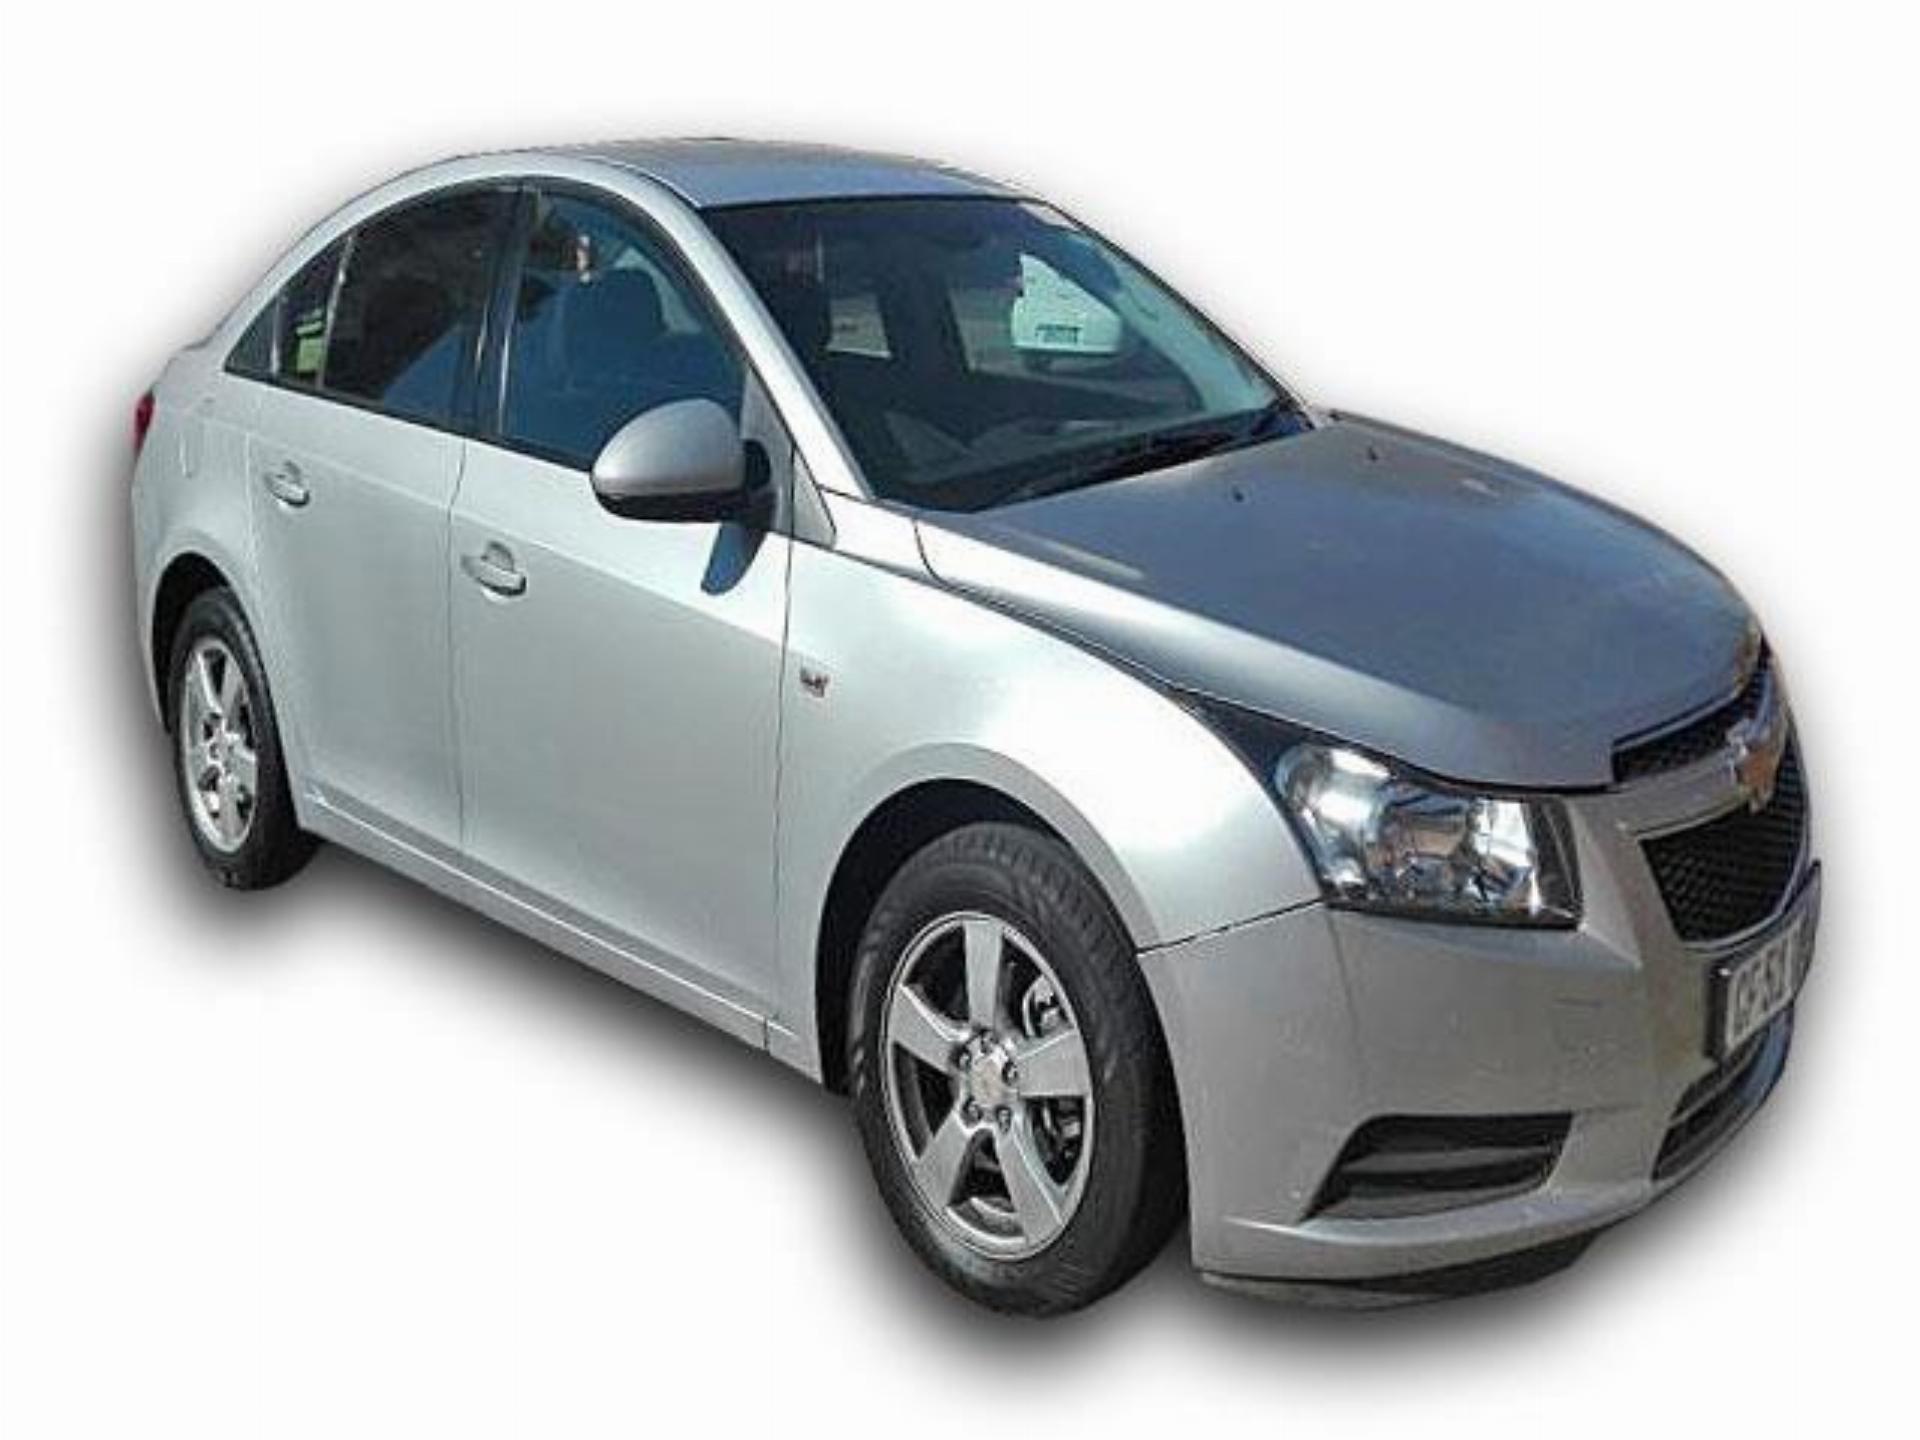 Used Chevrolet Cruze 1.6I Manual 2010 on auction PV1022499